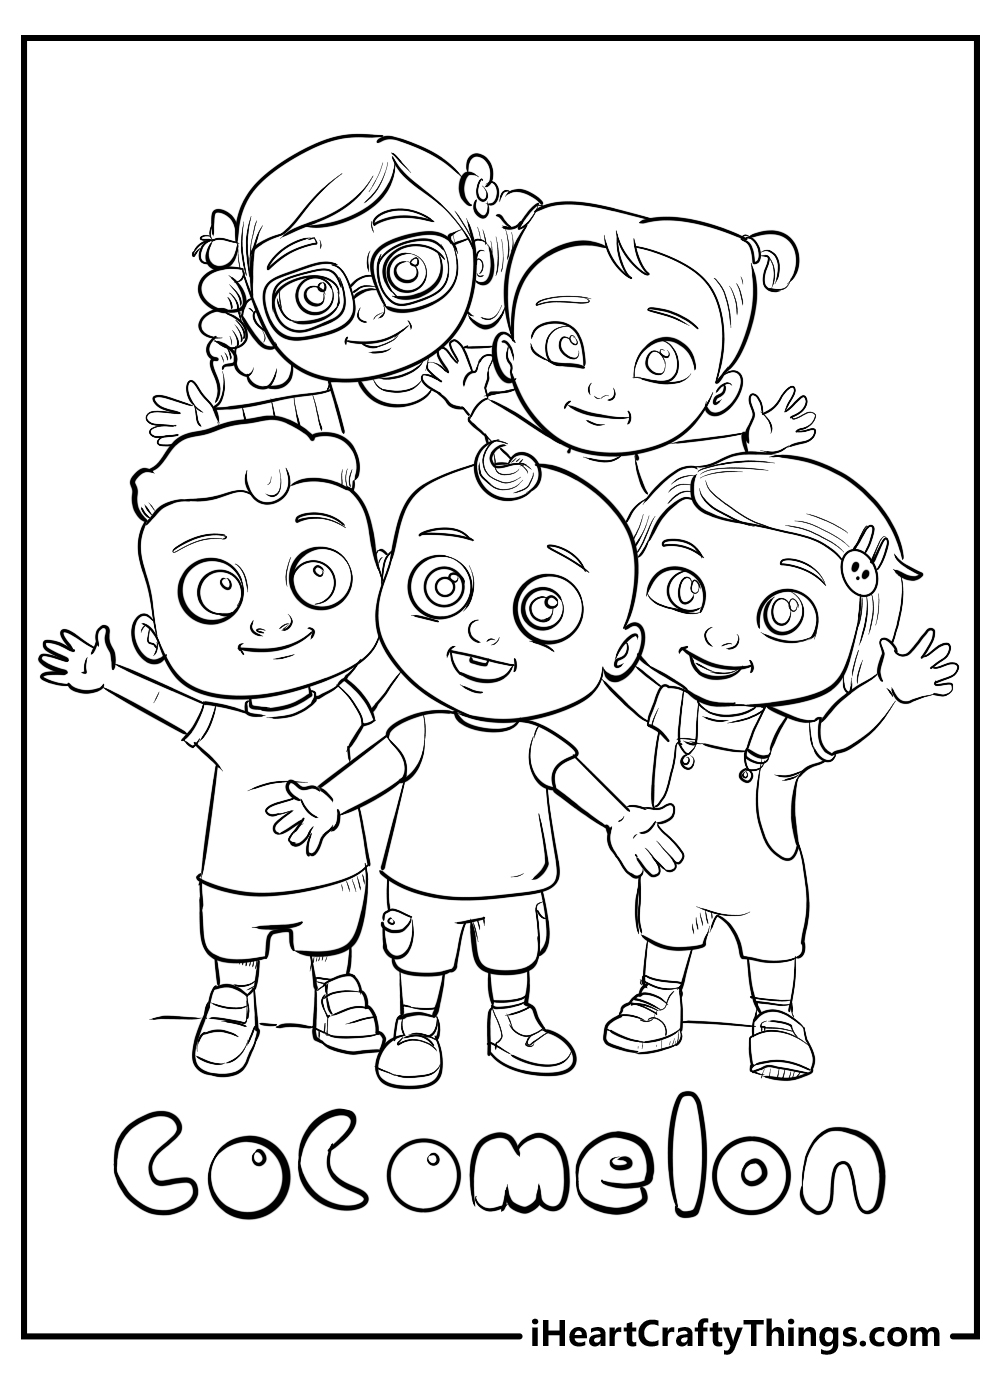 COCOMELON COLORING PACK